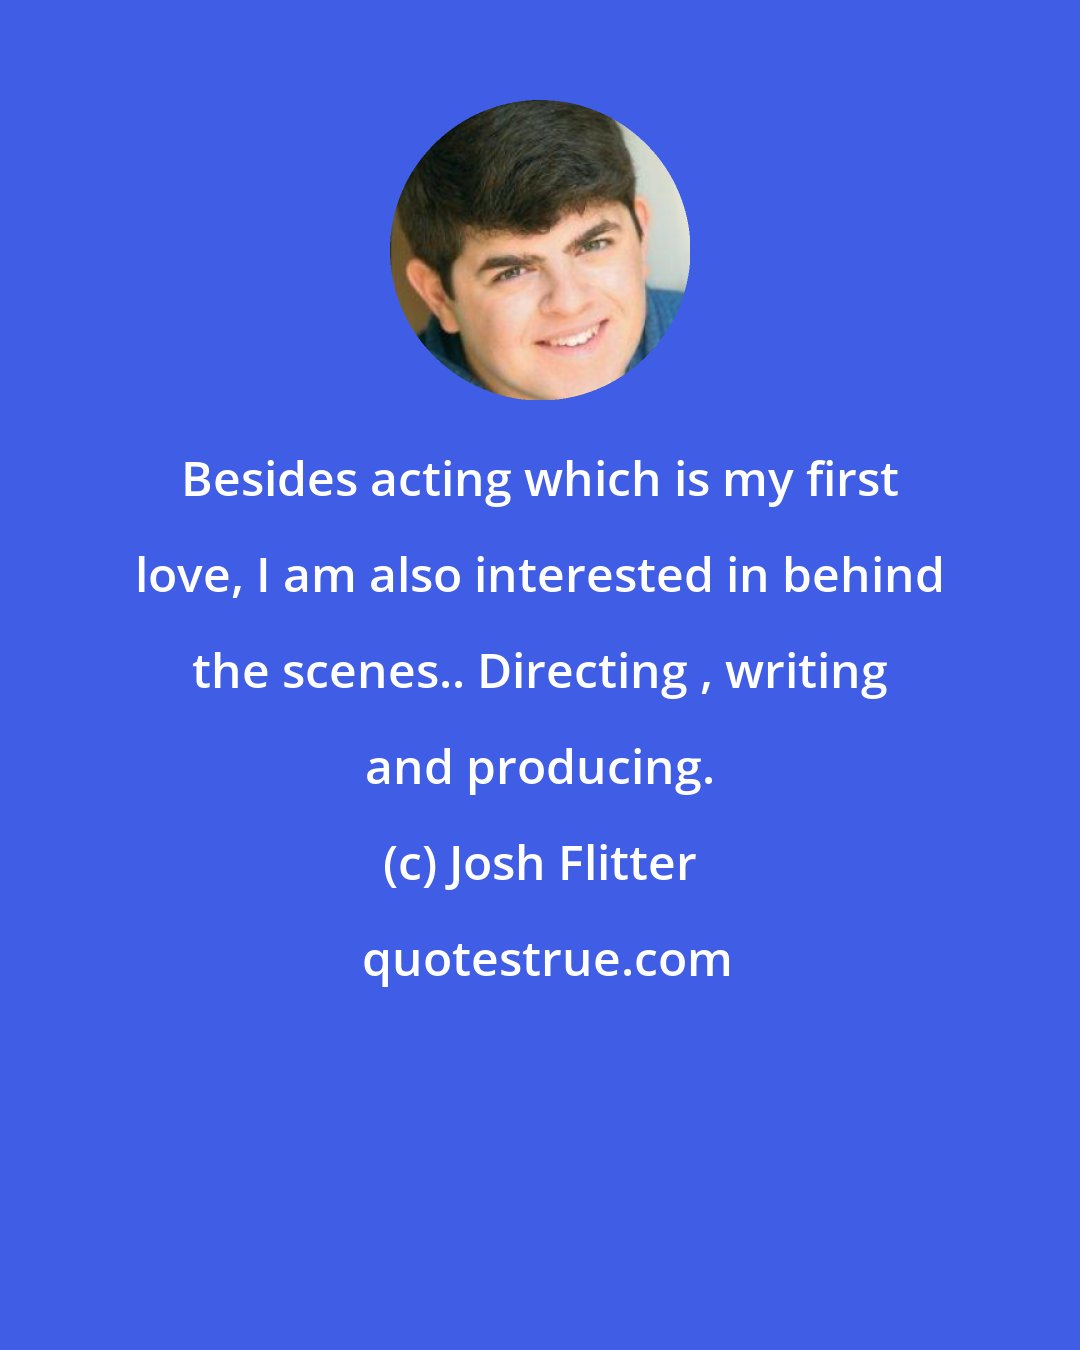 Josh Flitter: Besides acting which is my first love, I am also interested in behind the scenes.. Directing , writing and producing.